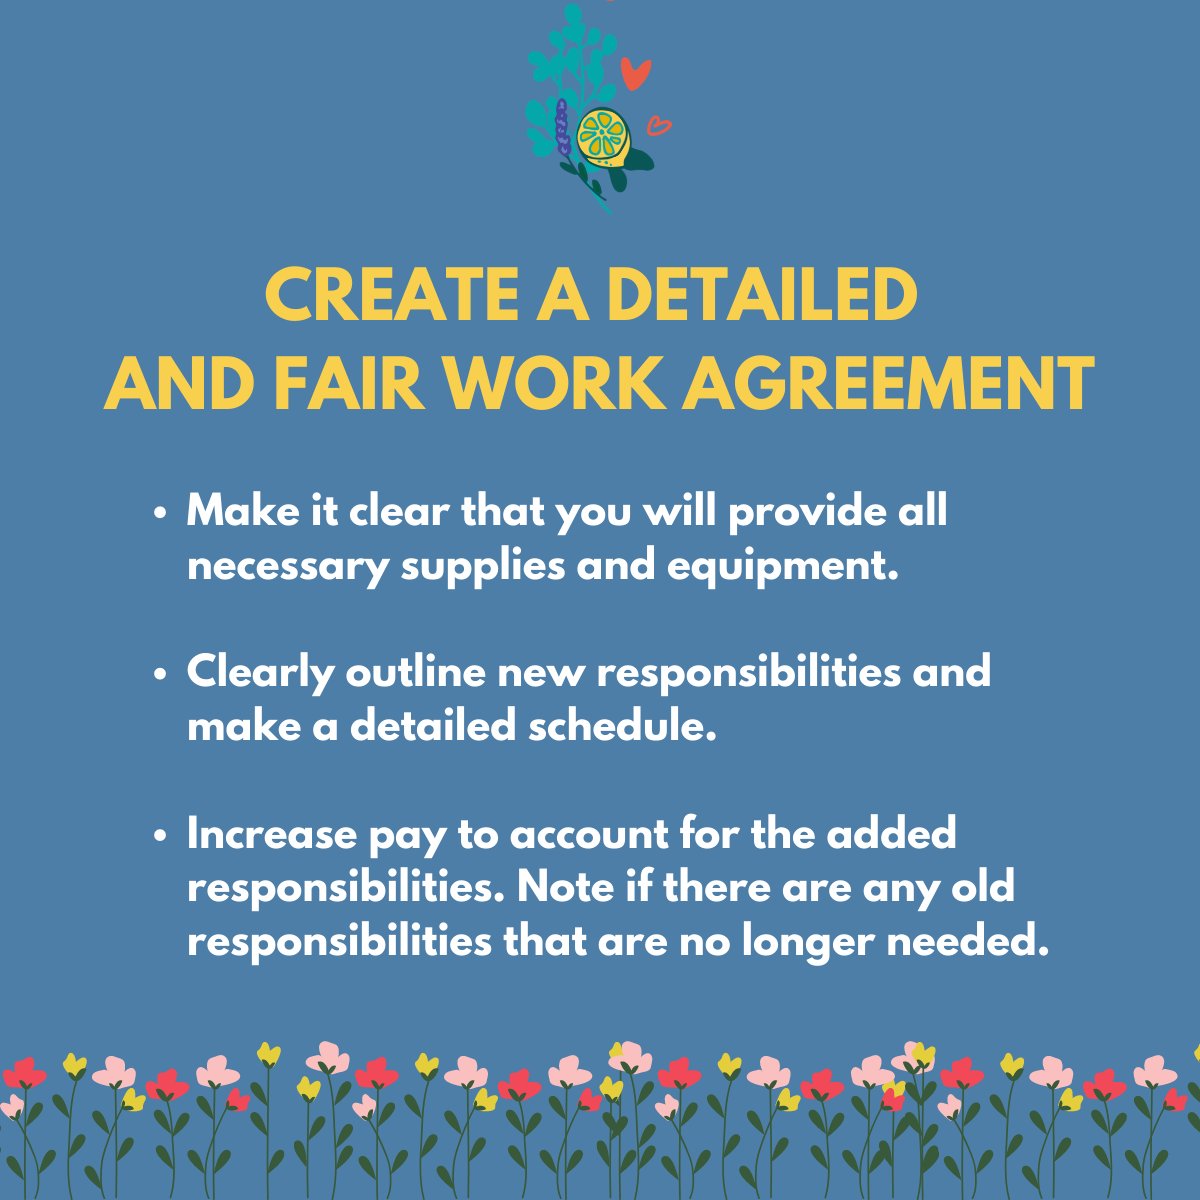 Next: new responsibilities call for a new work agreement. Clarify new roles and expectations in writing. If your nanny takes on additional online learning responsibilities, increase their pay. /4